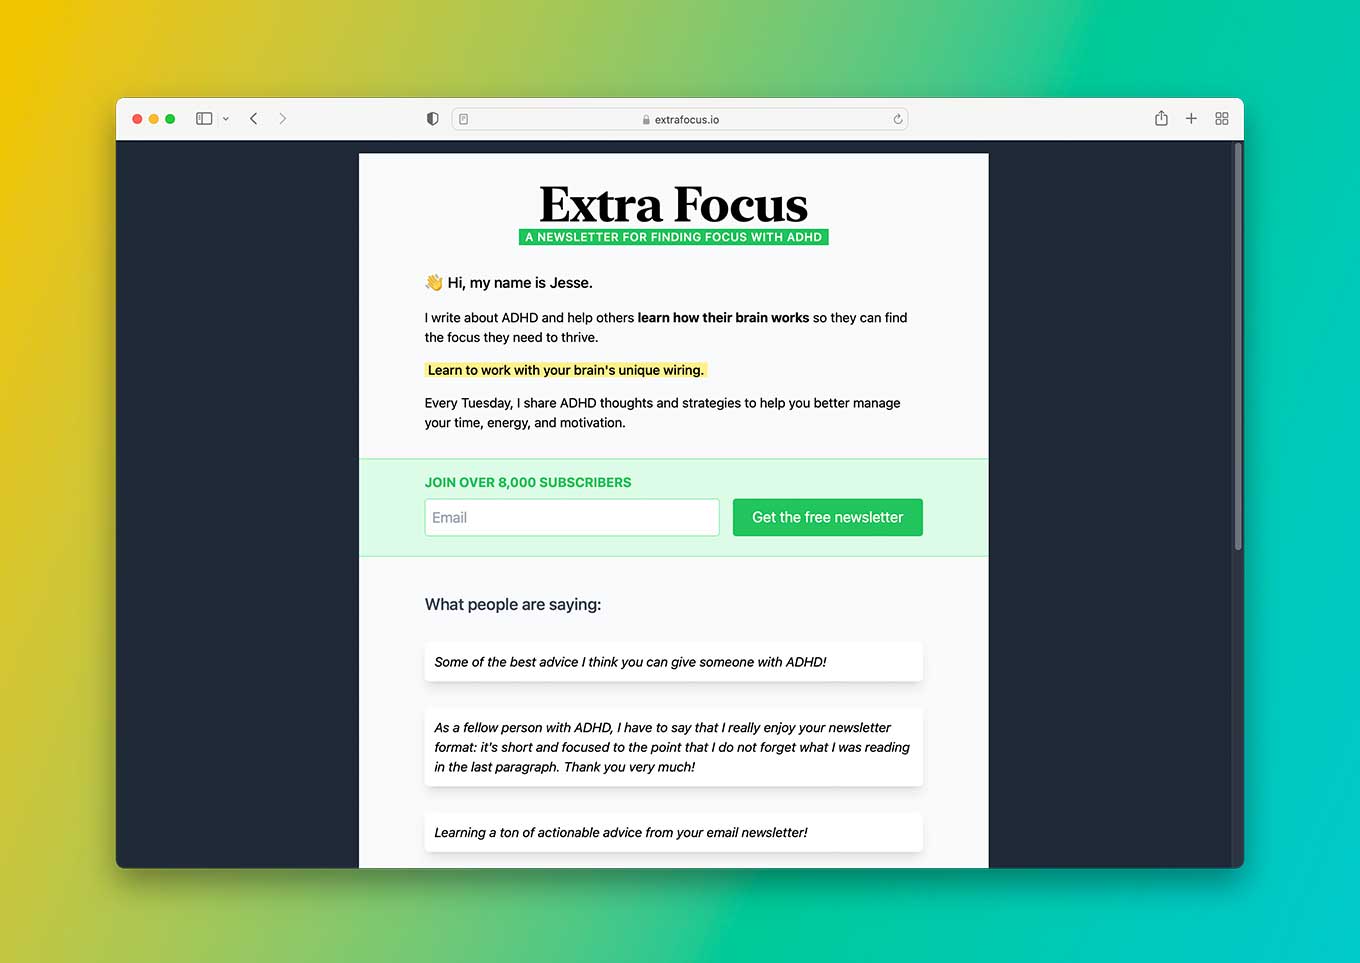 The Extra Focus webpage sits atop a gradient background.